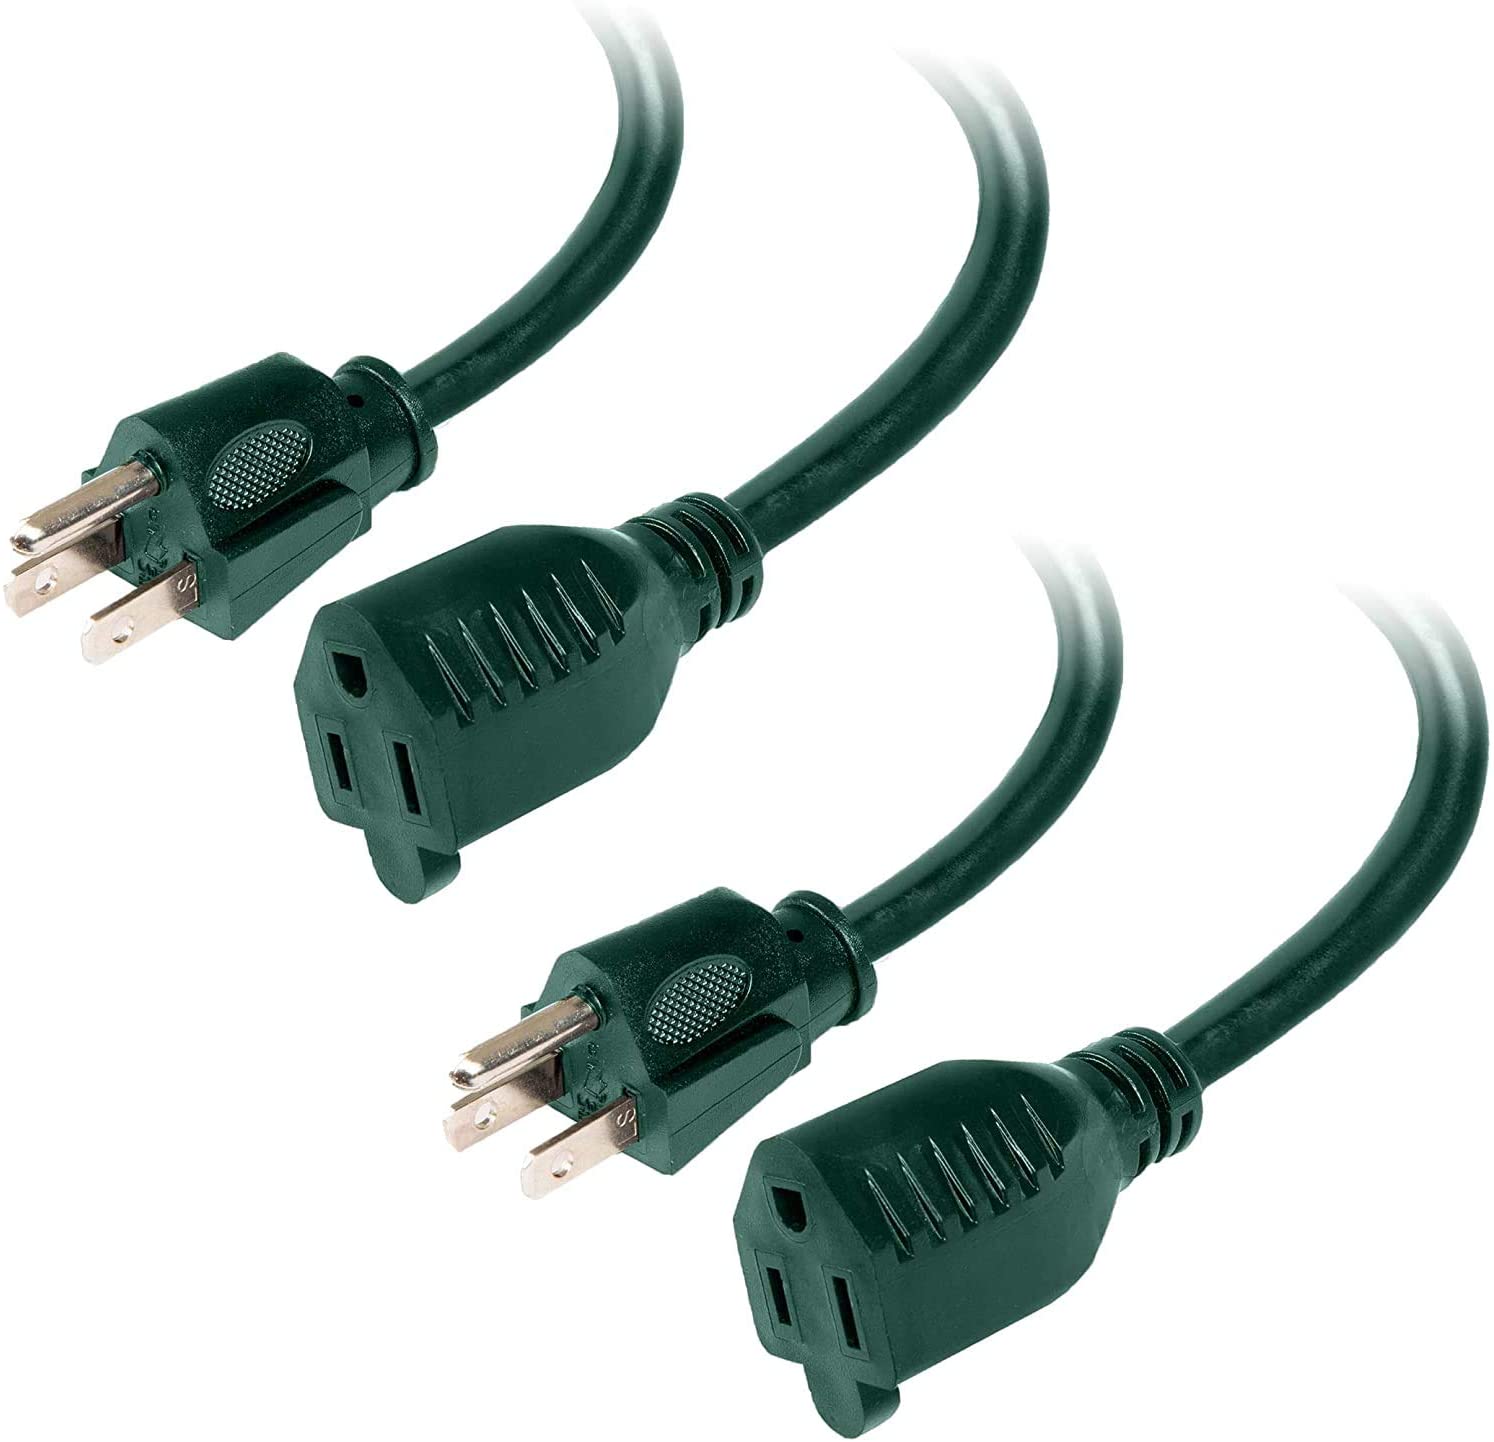 2 Pack of 50 Ft Green Extension Cords - 16/3 SJTW Durable Electrical Cable Set